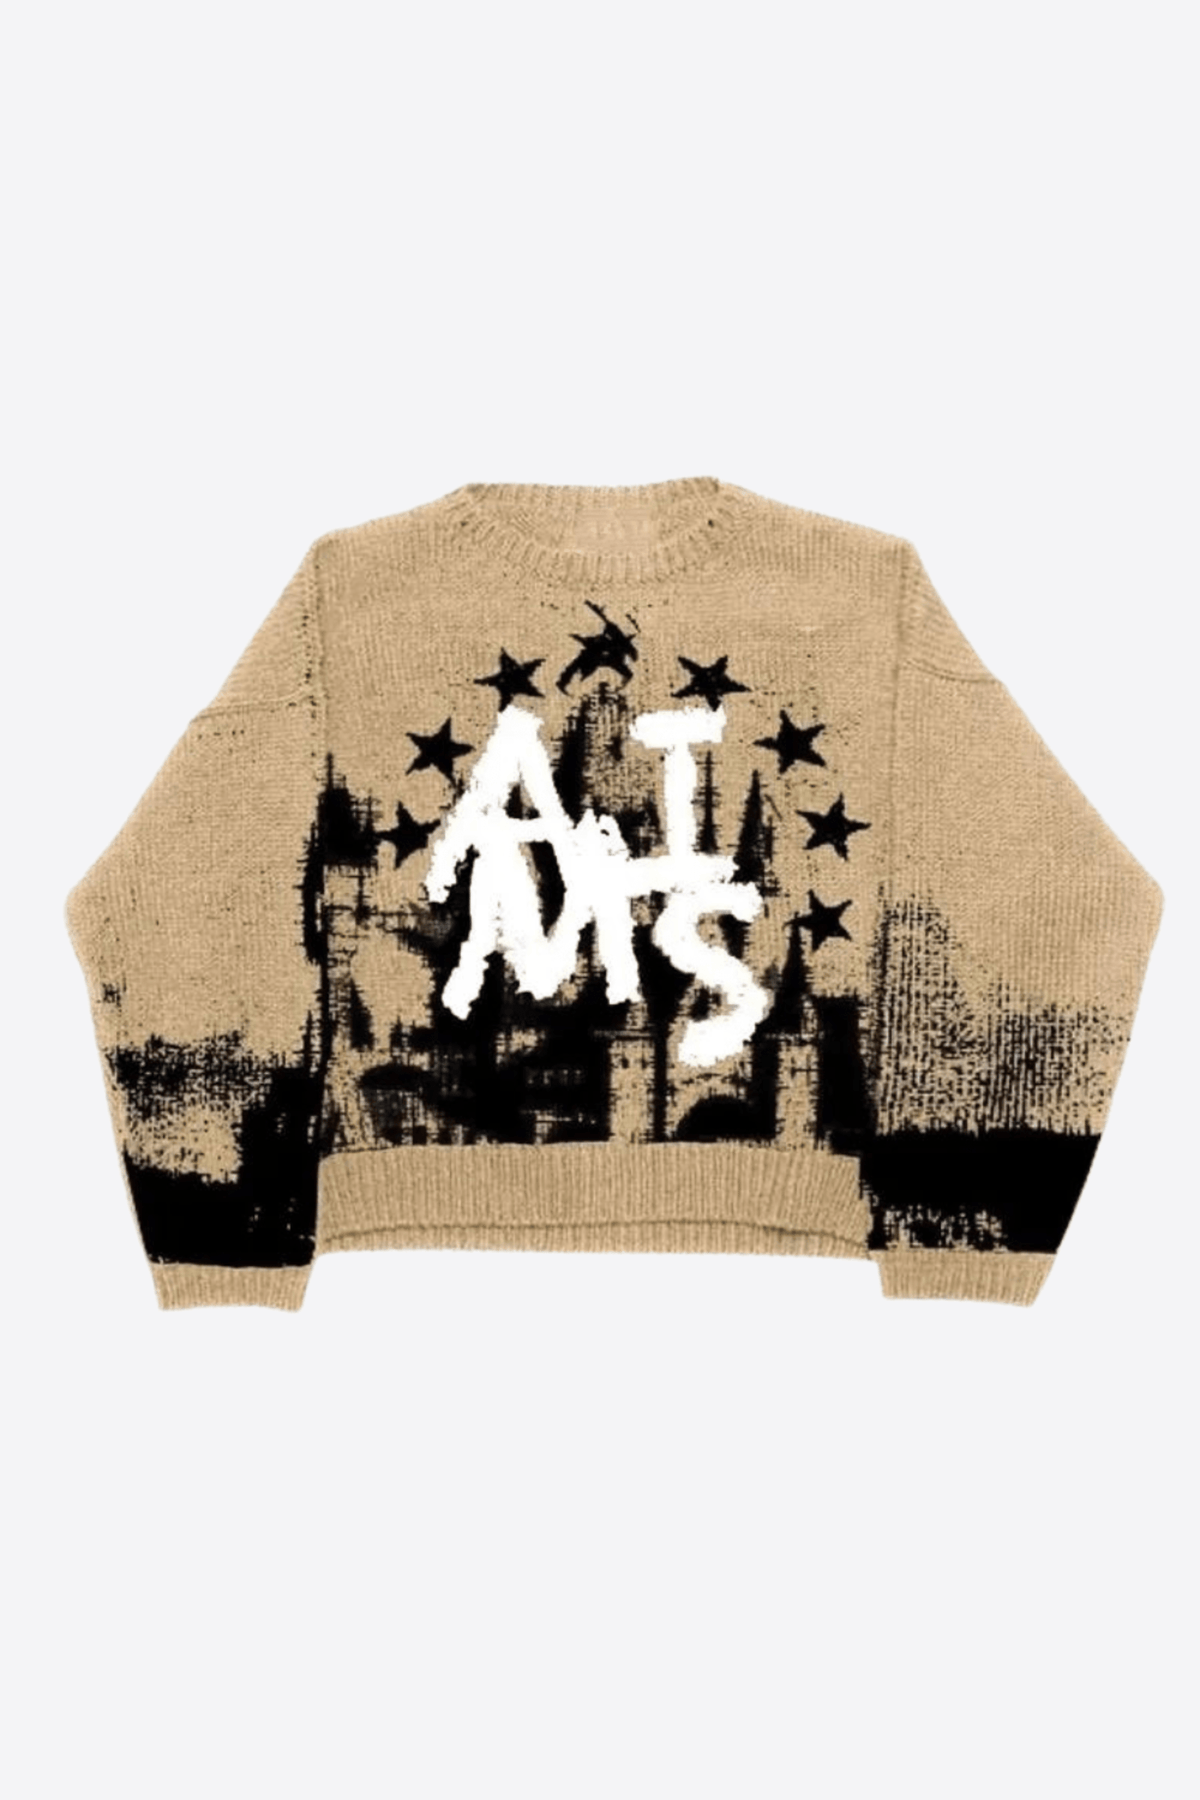 Alessandro Toscani M DALE™ | American Vintage Street Sweater